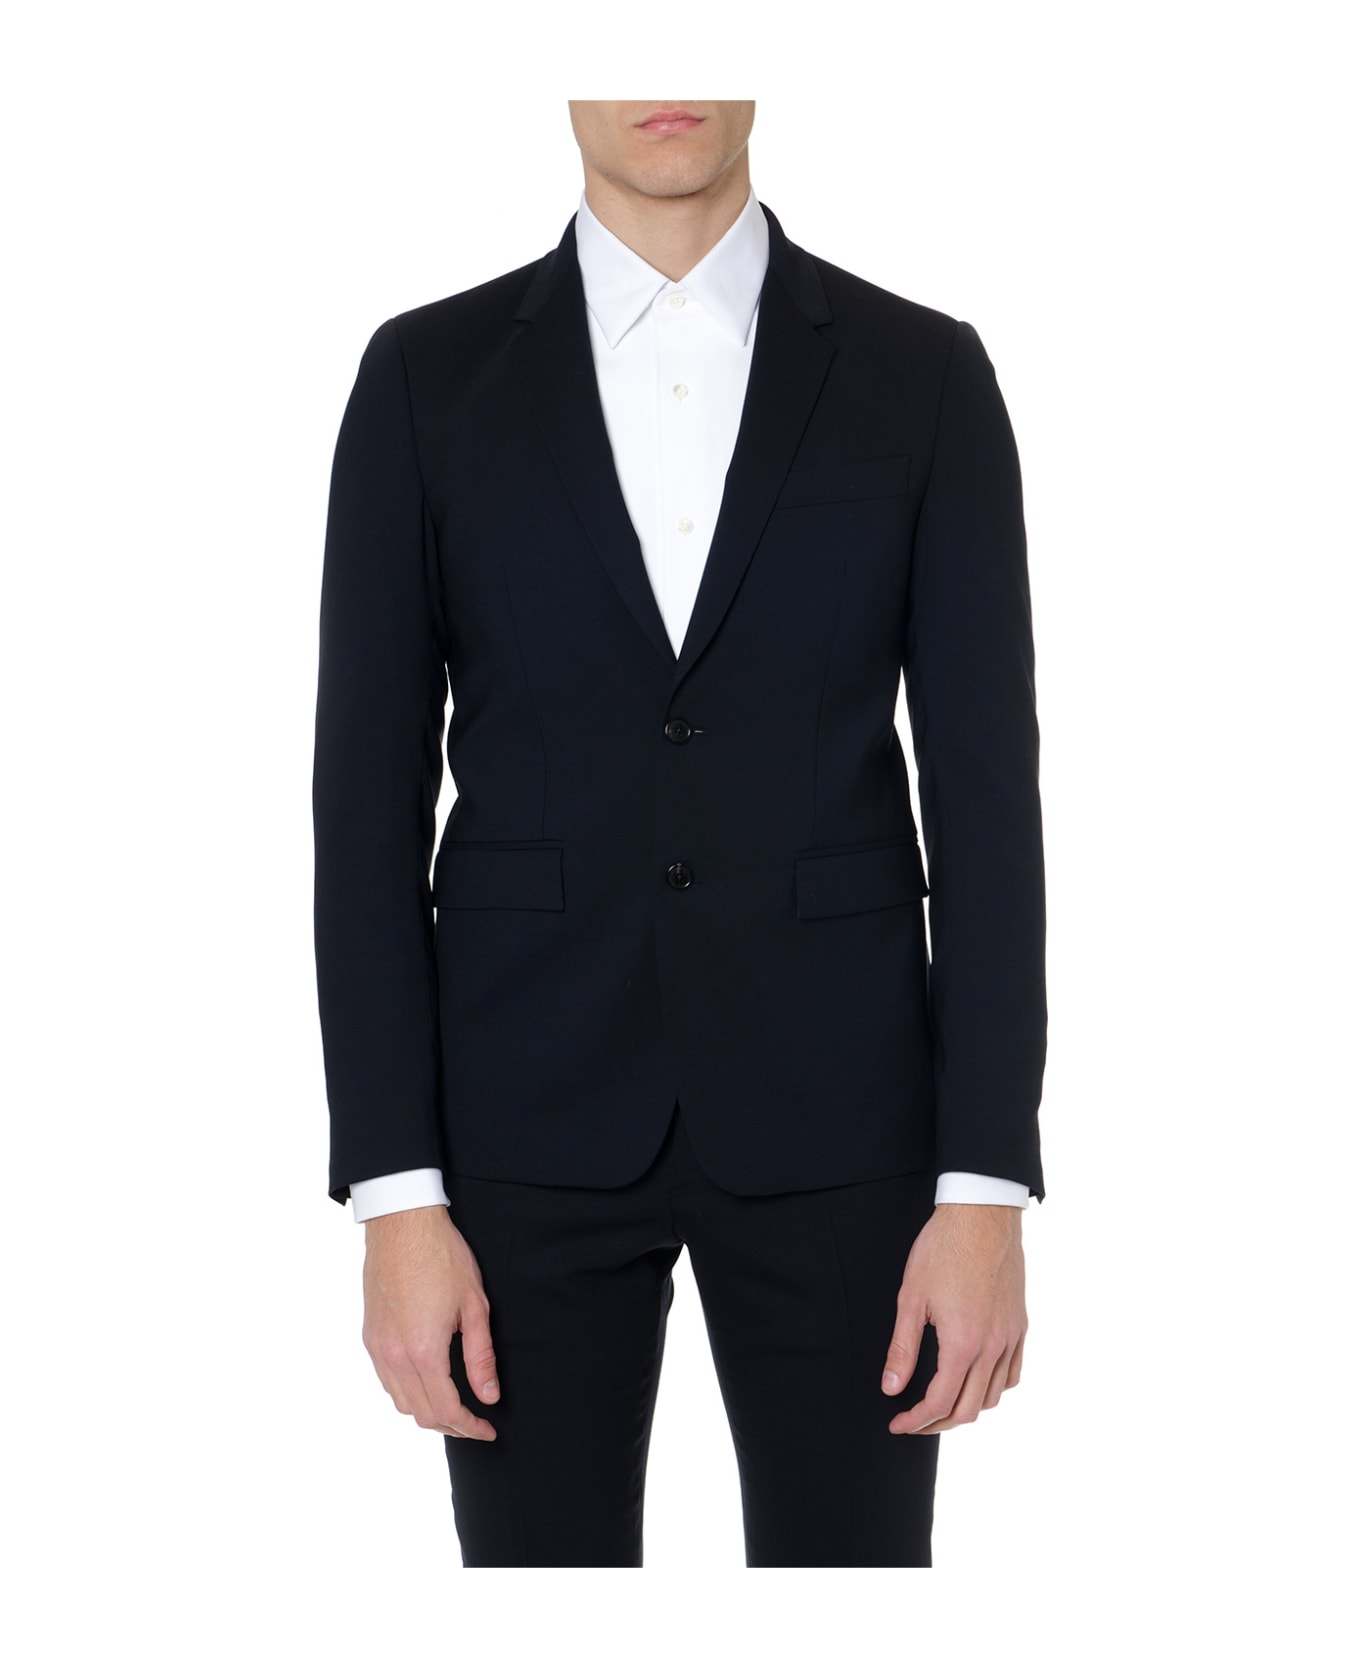 Mauro Grifoni Blue Navy Wool Classic Suit | italist, ALWAYS LIKE A SALE